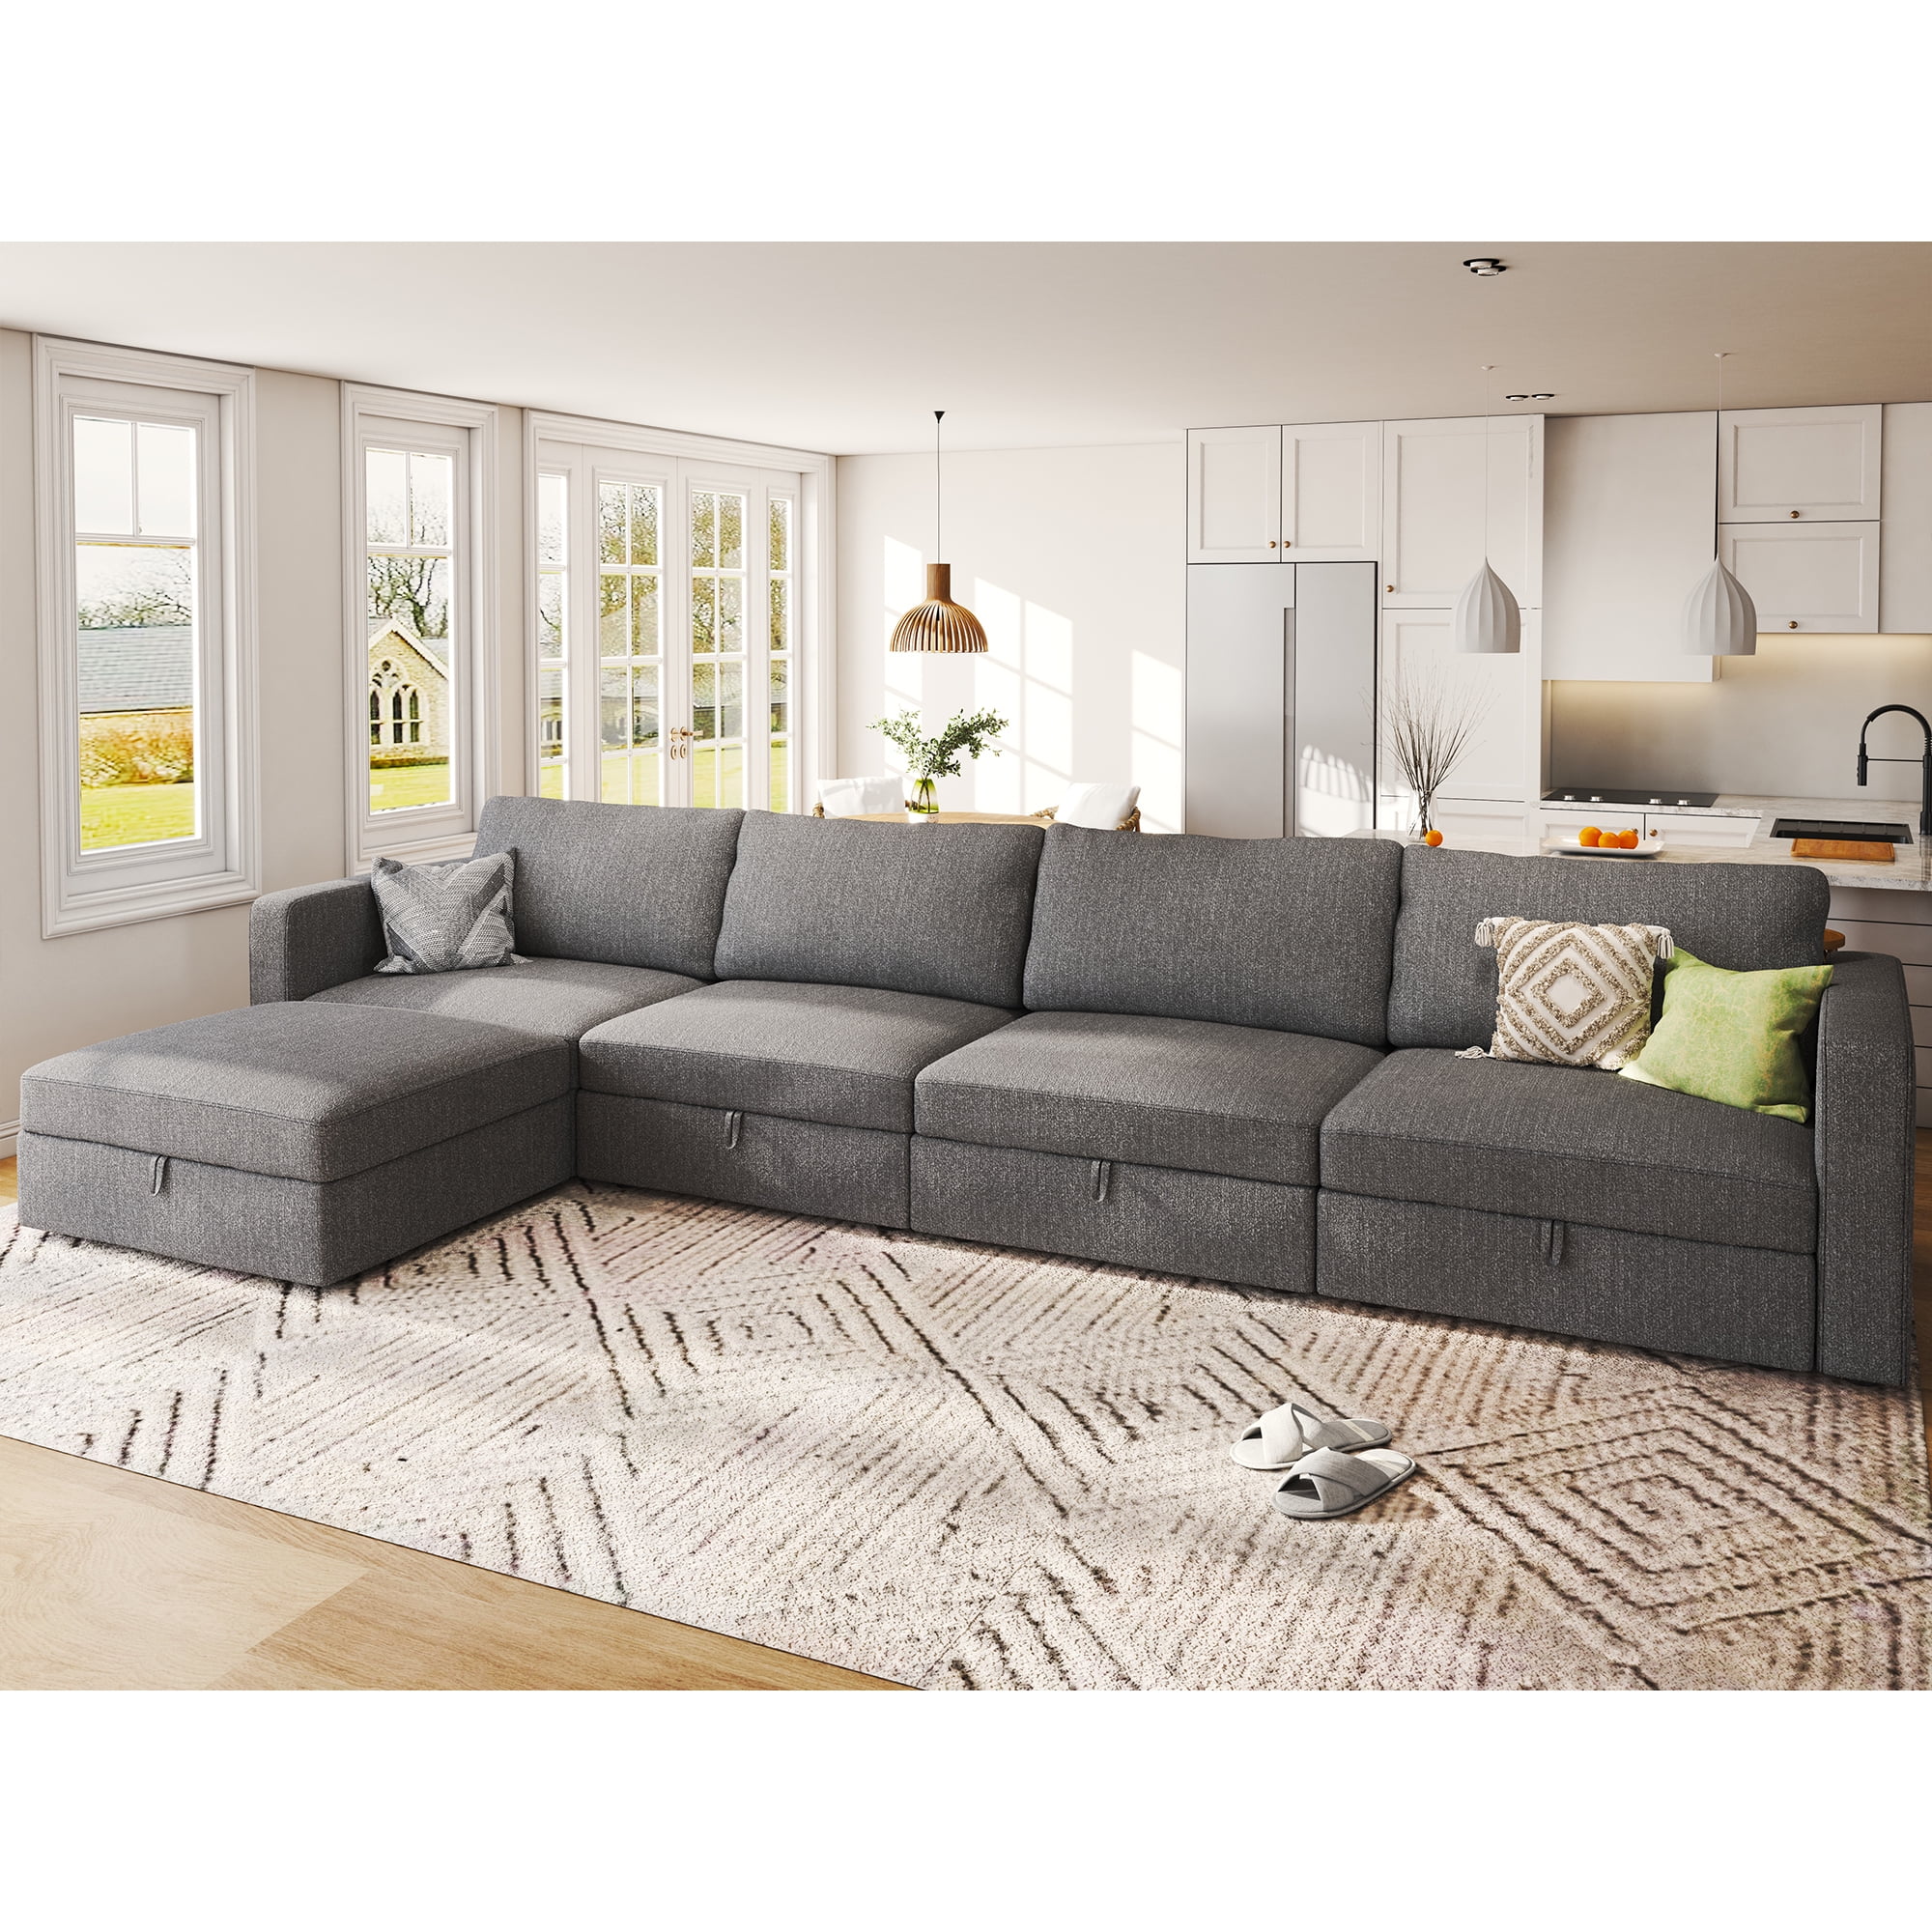 Sectional Deep Seat Sofa Couch L Shaped